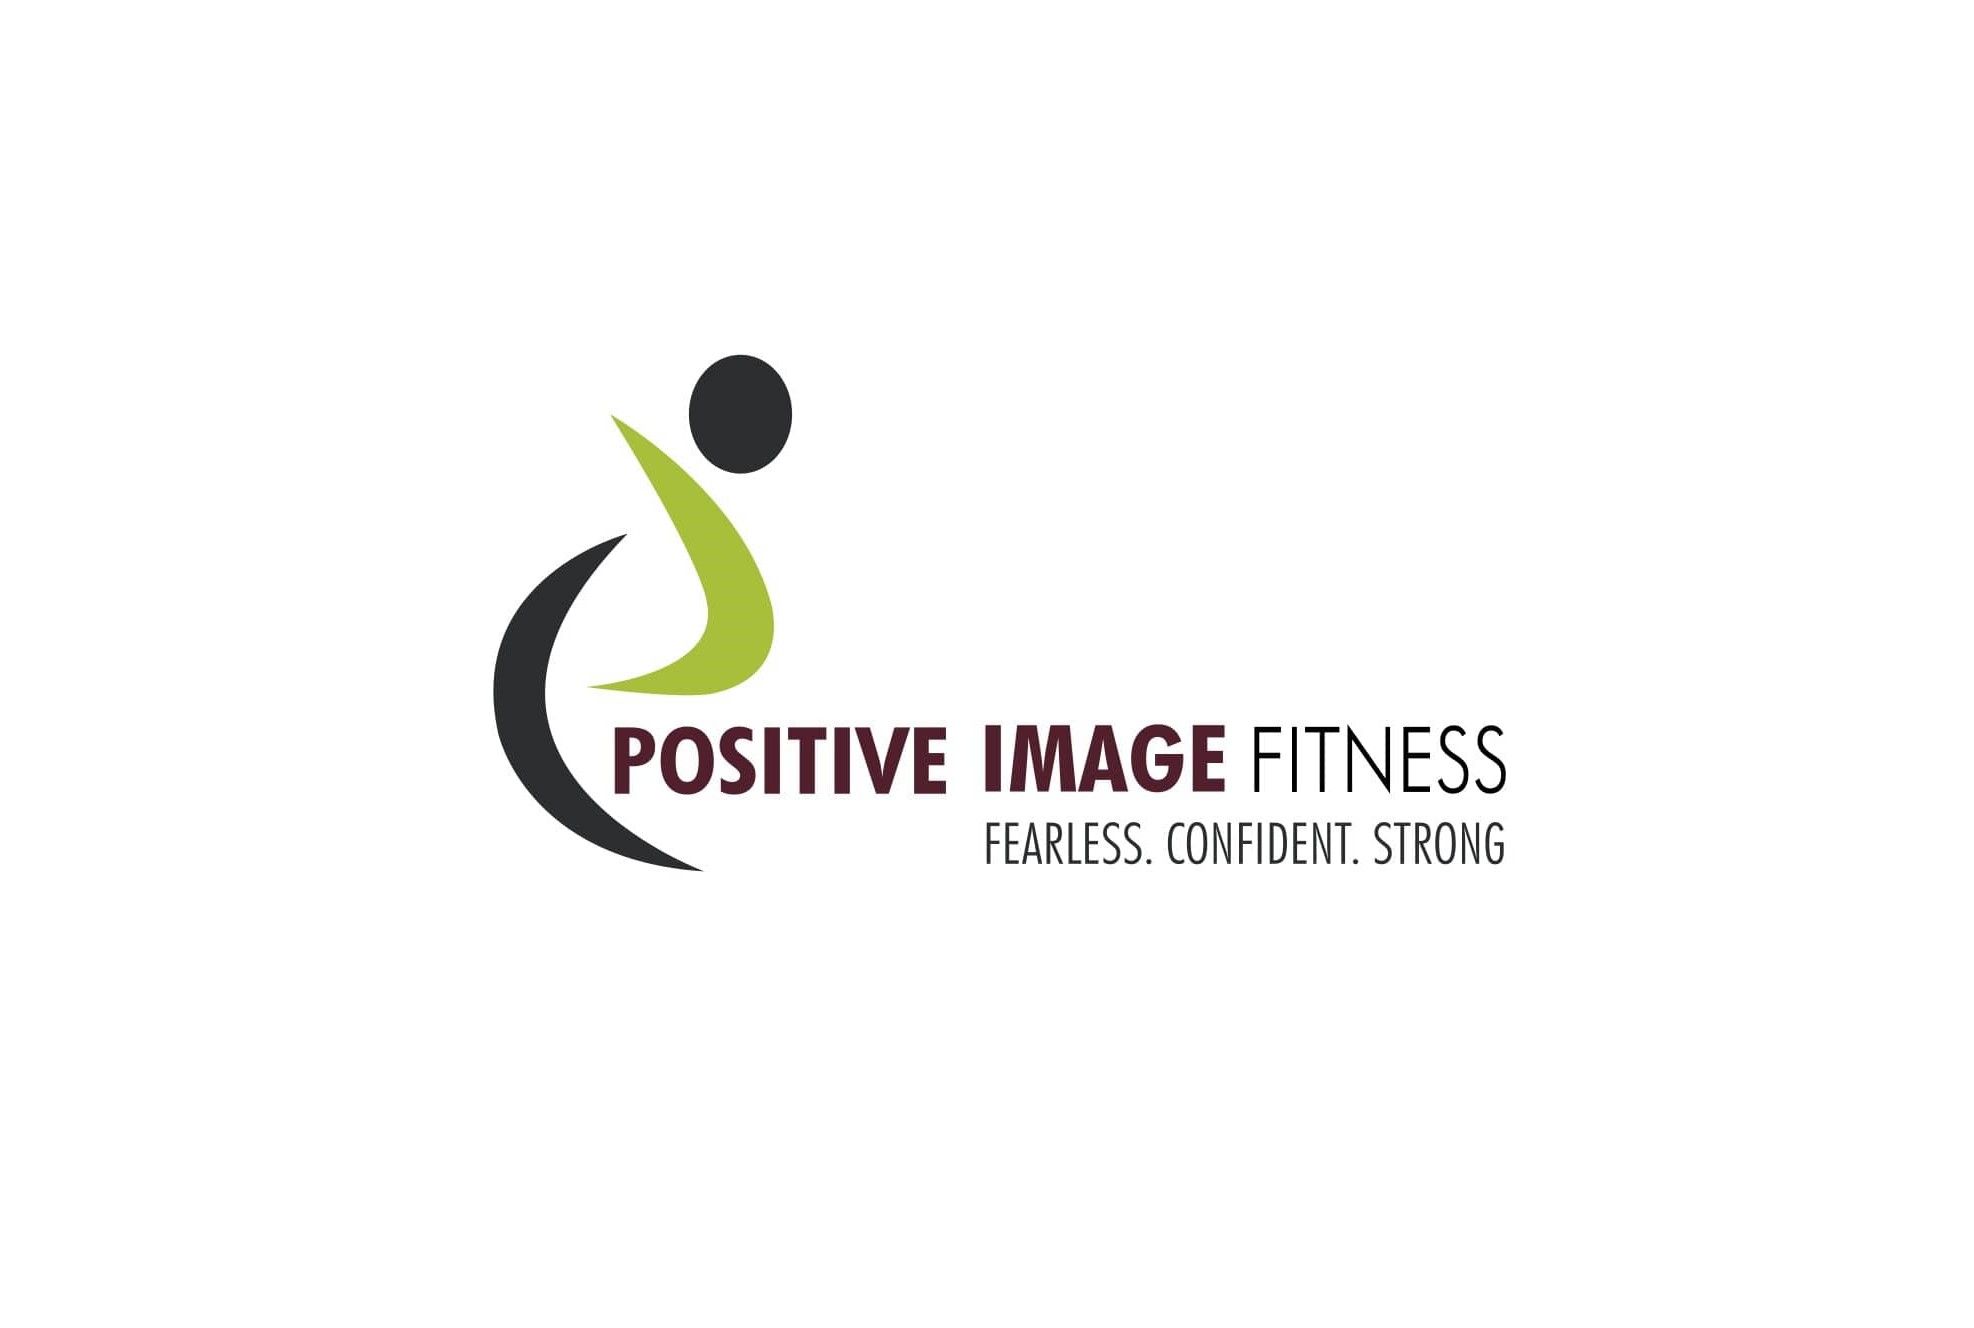 Be Fearless, Confident, & Strong - Positive Image Fitness